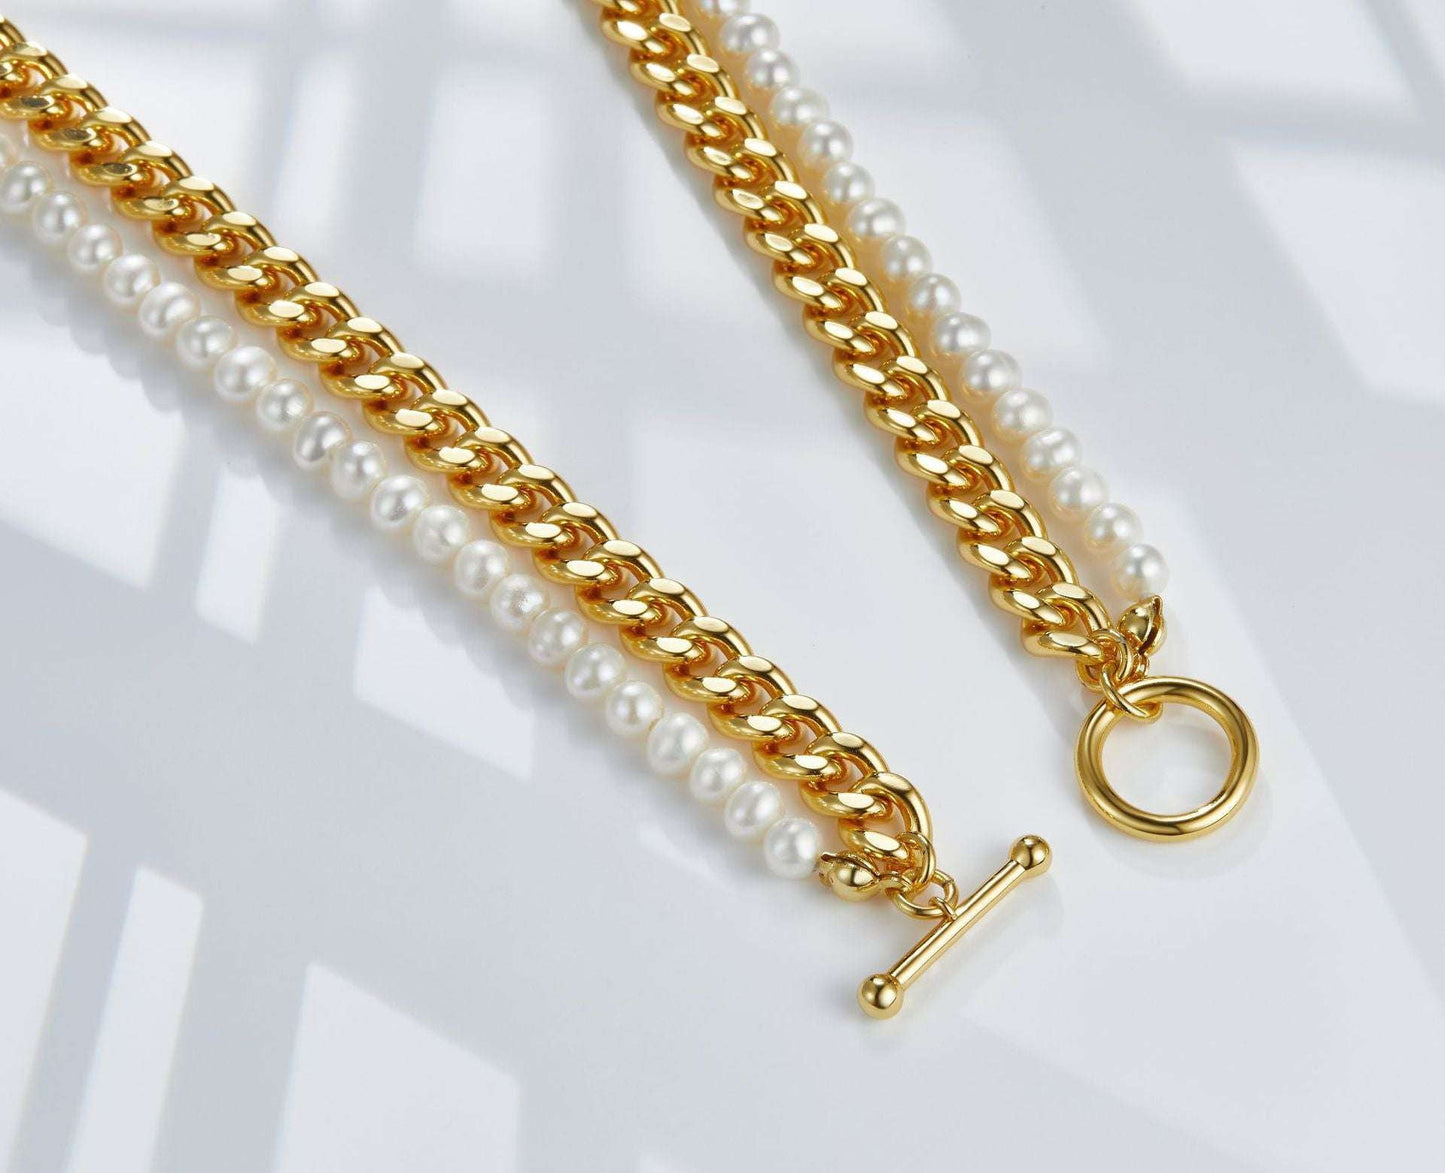 Cuban Link Chain Necklace, Freshwater Pearl Clavicle Chain, Gold Plating Pearl Necklace - available at Sparq Mart